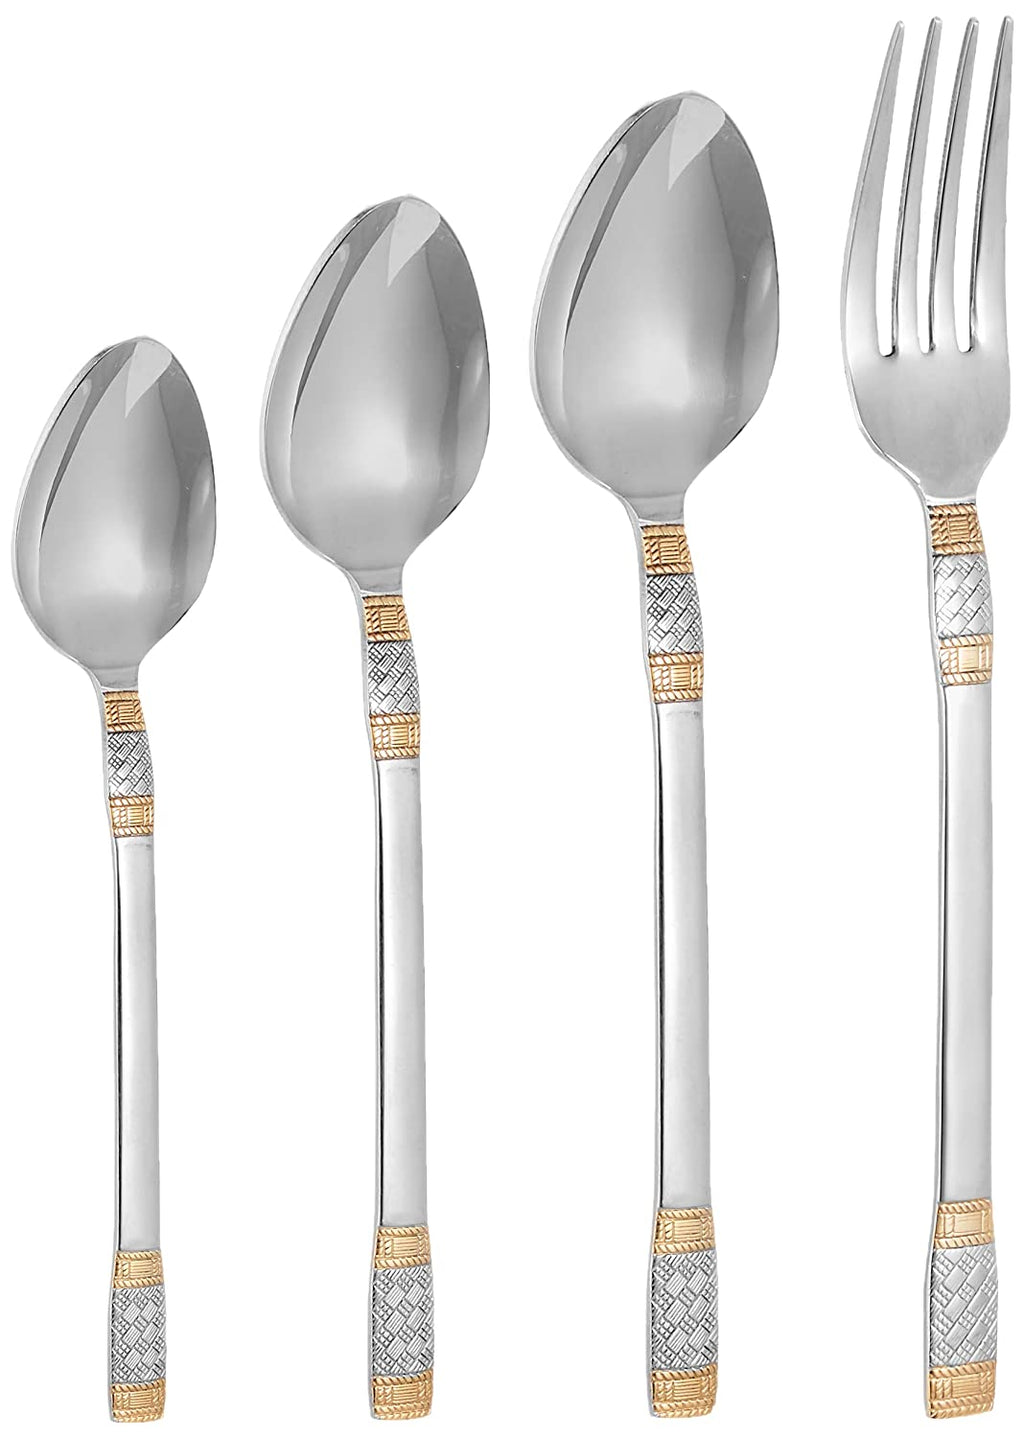 Detec™ FnS Stainless Steel Celebration Hanging Set with Baby Spoon, 24-Piece, Silver